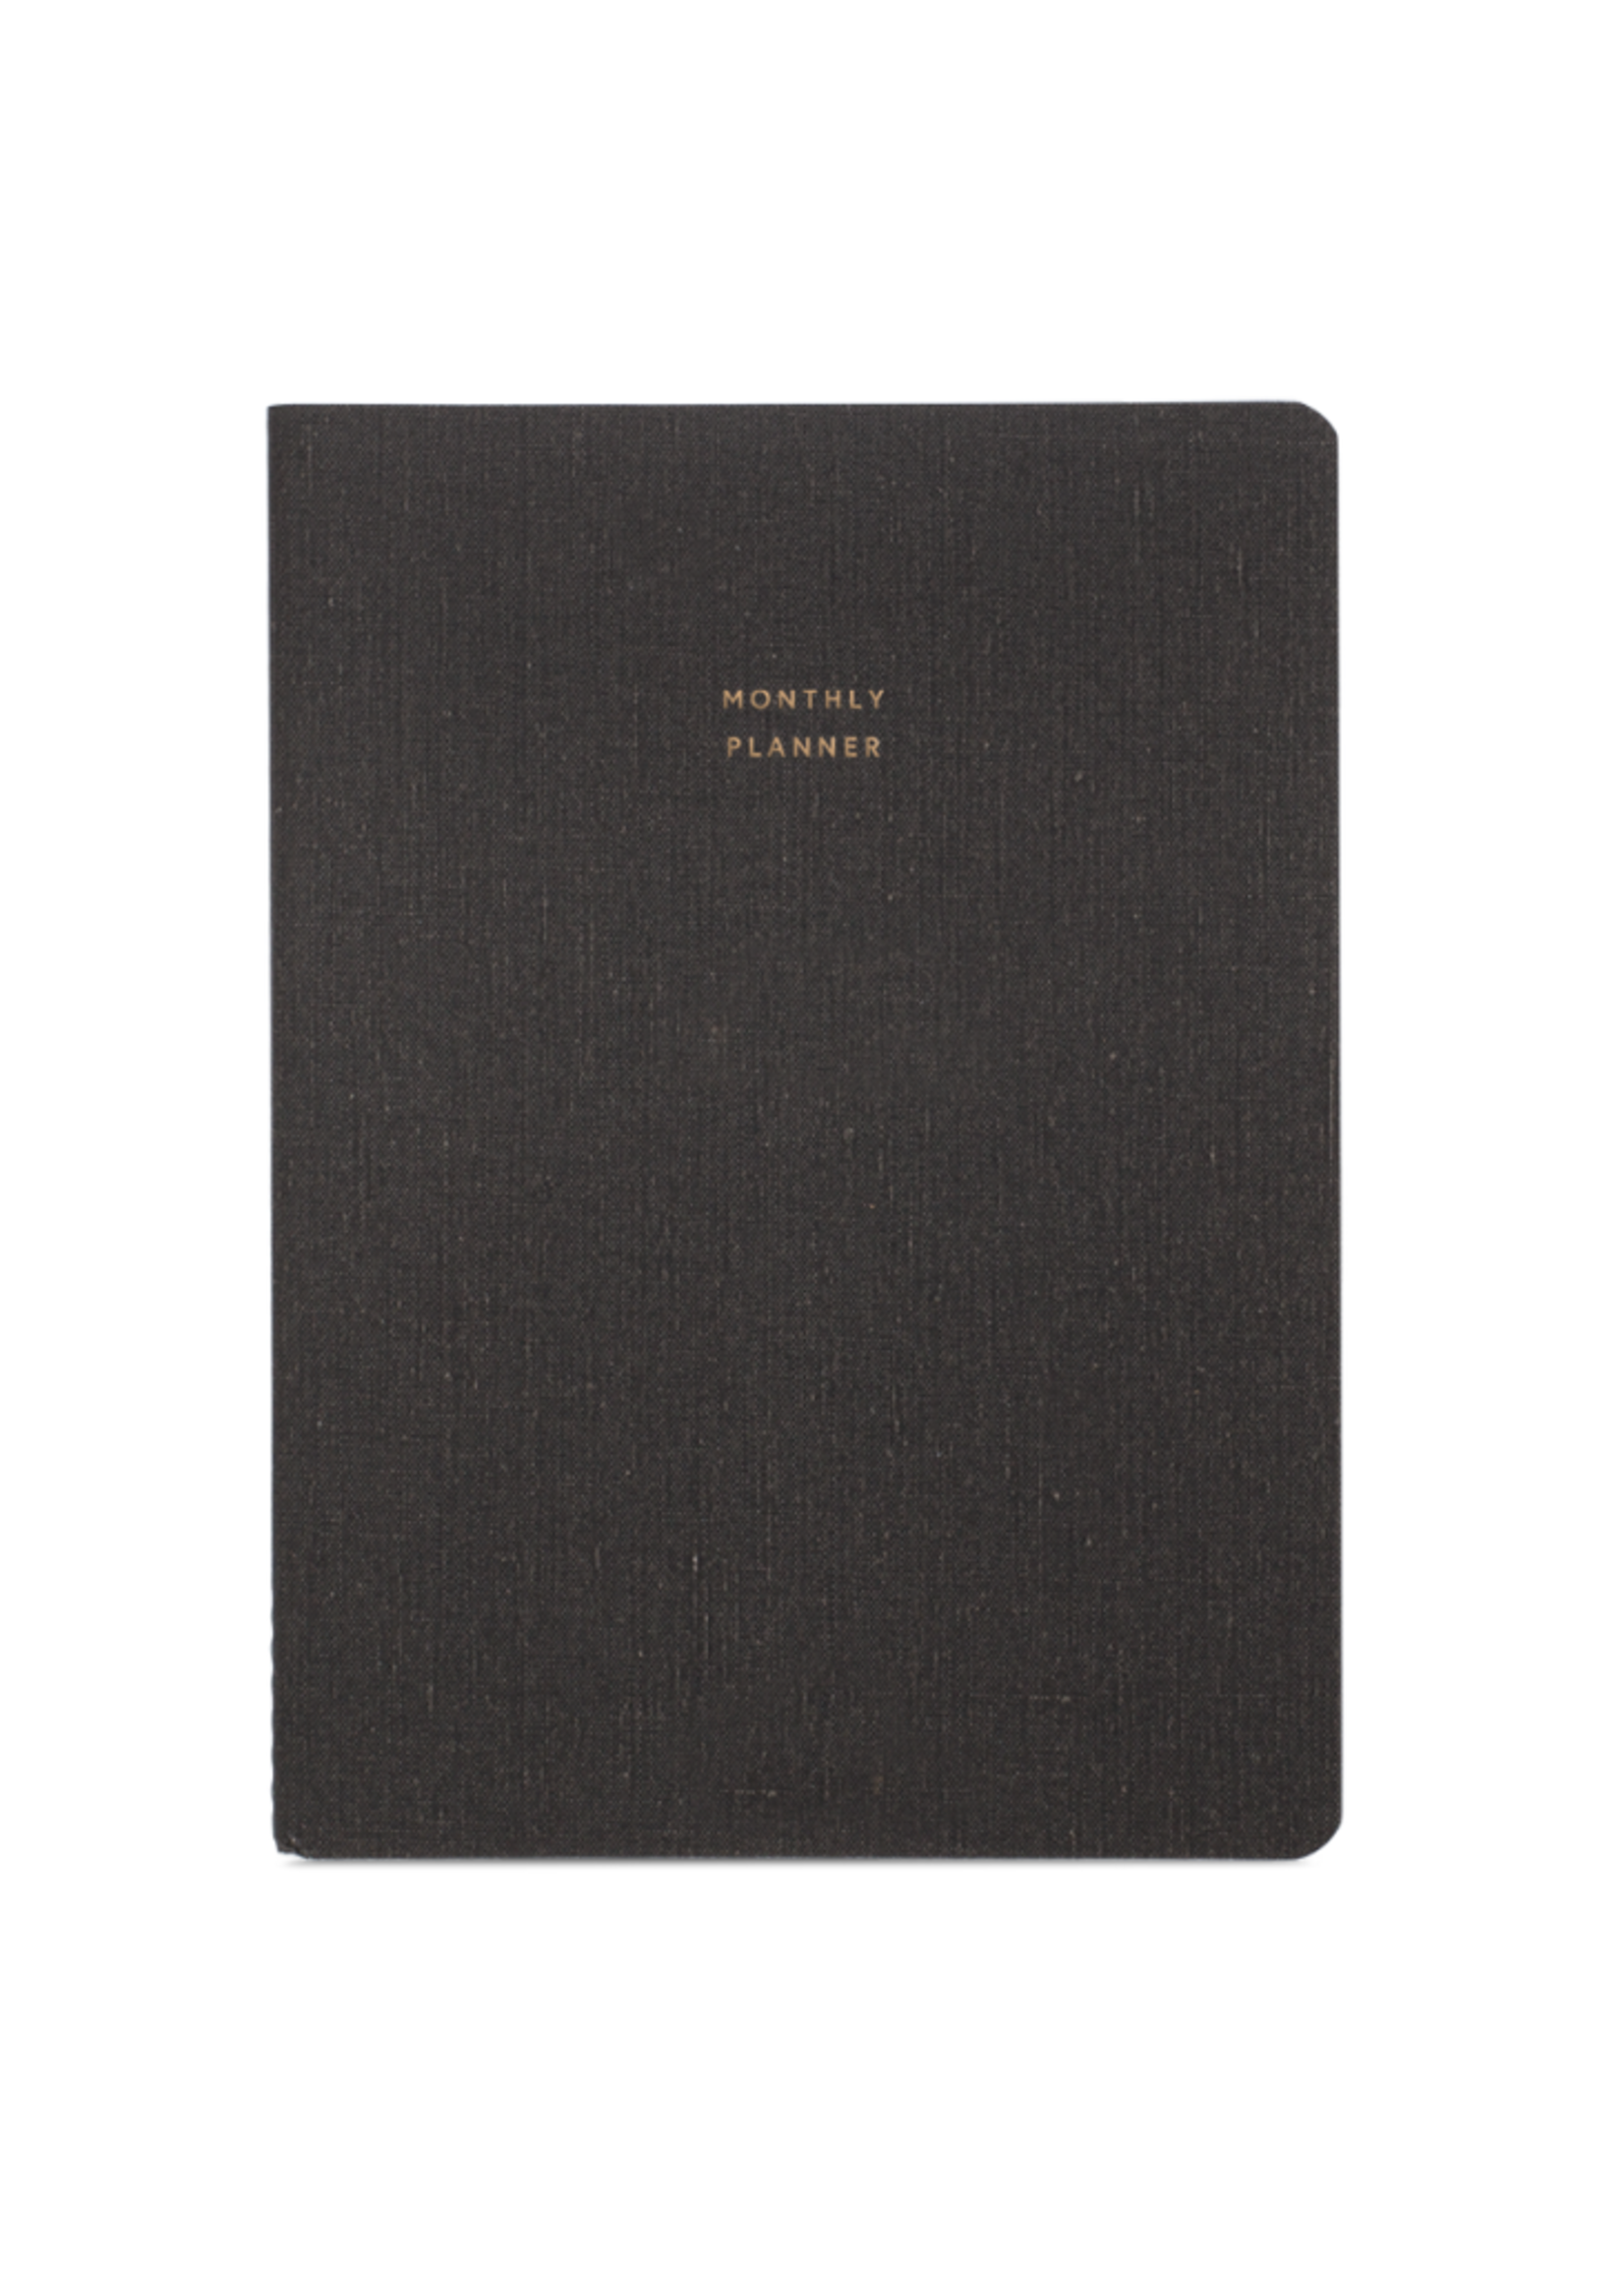 Appointed Appointed Open Dated Monthly Planner: Charcoal Gray